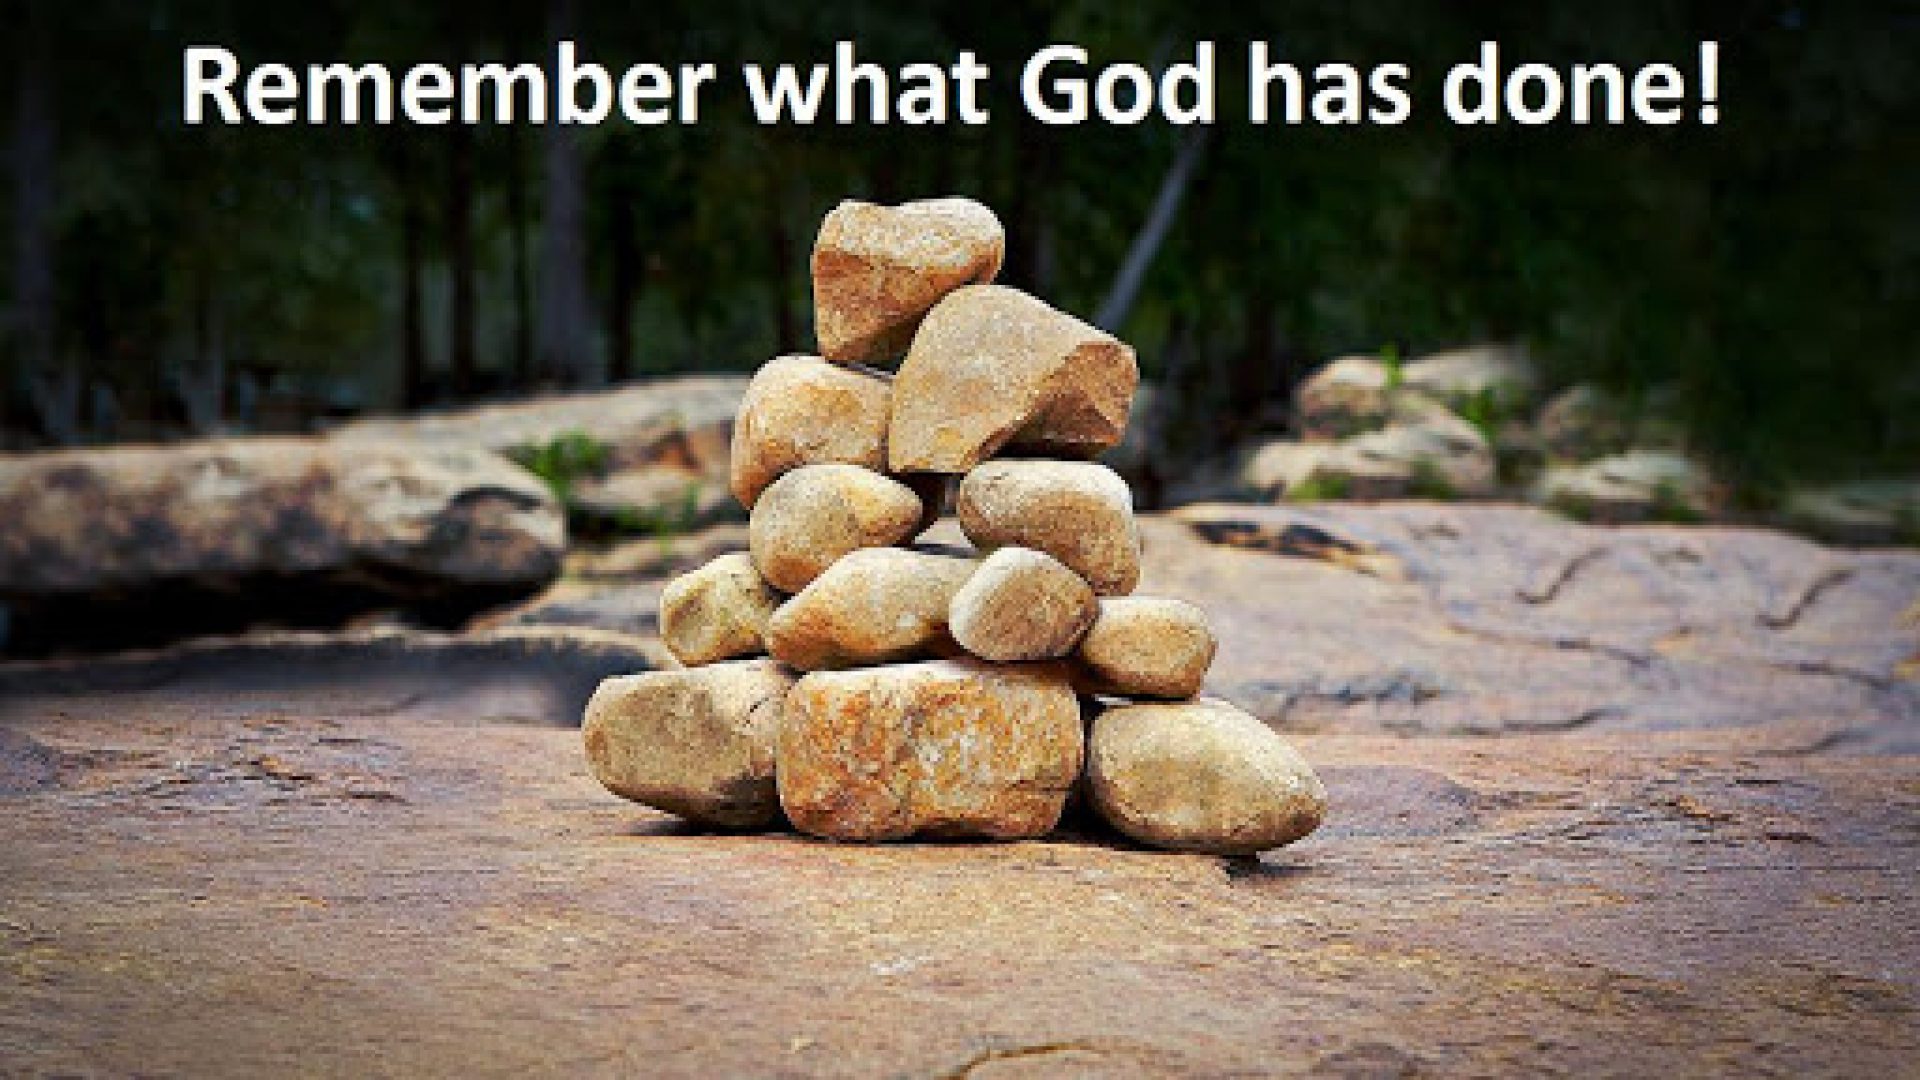 REMEMBERING WHAT GOD HAS DONE